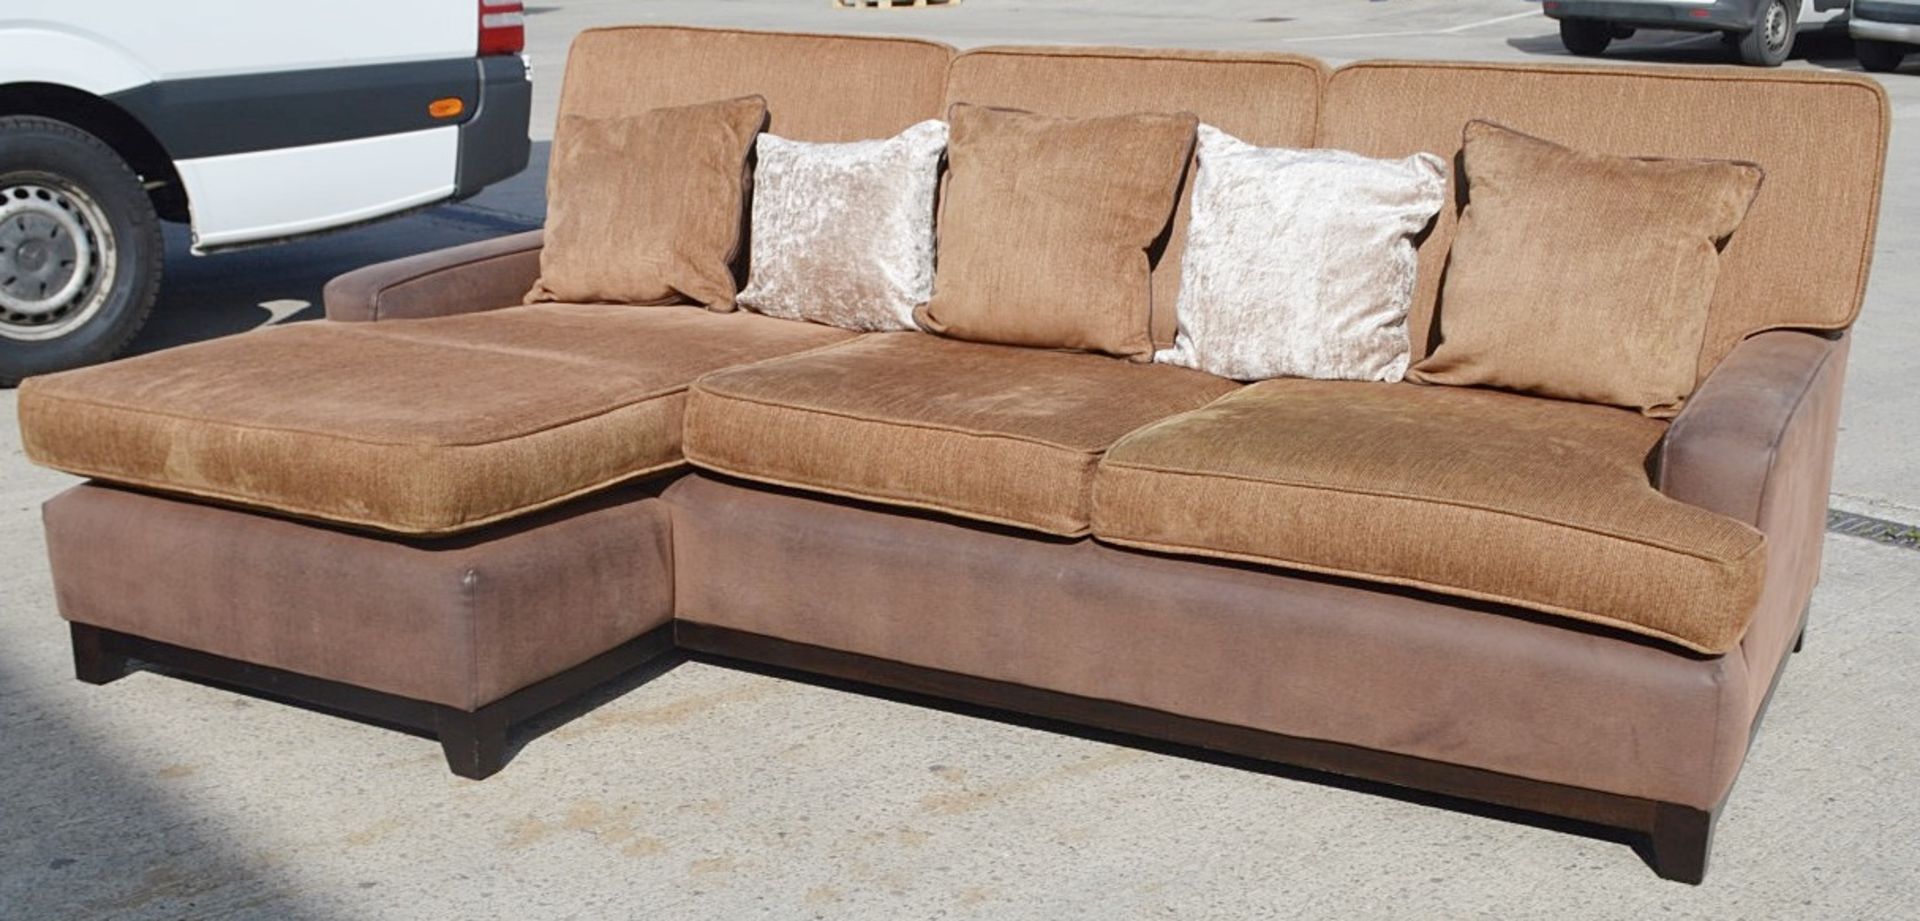 A Pair Of 2.5 Metre Wide Corner Sofas - Dimensions: W250 x D155 x D90cm / Seat Height 47cm - - Image 17 of 21